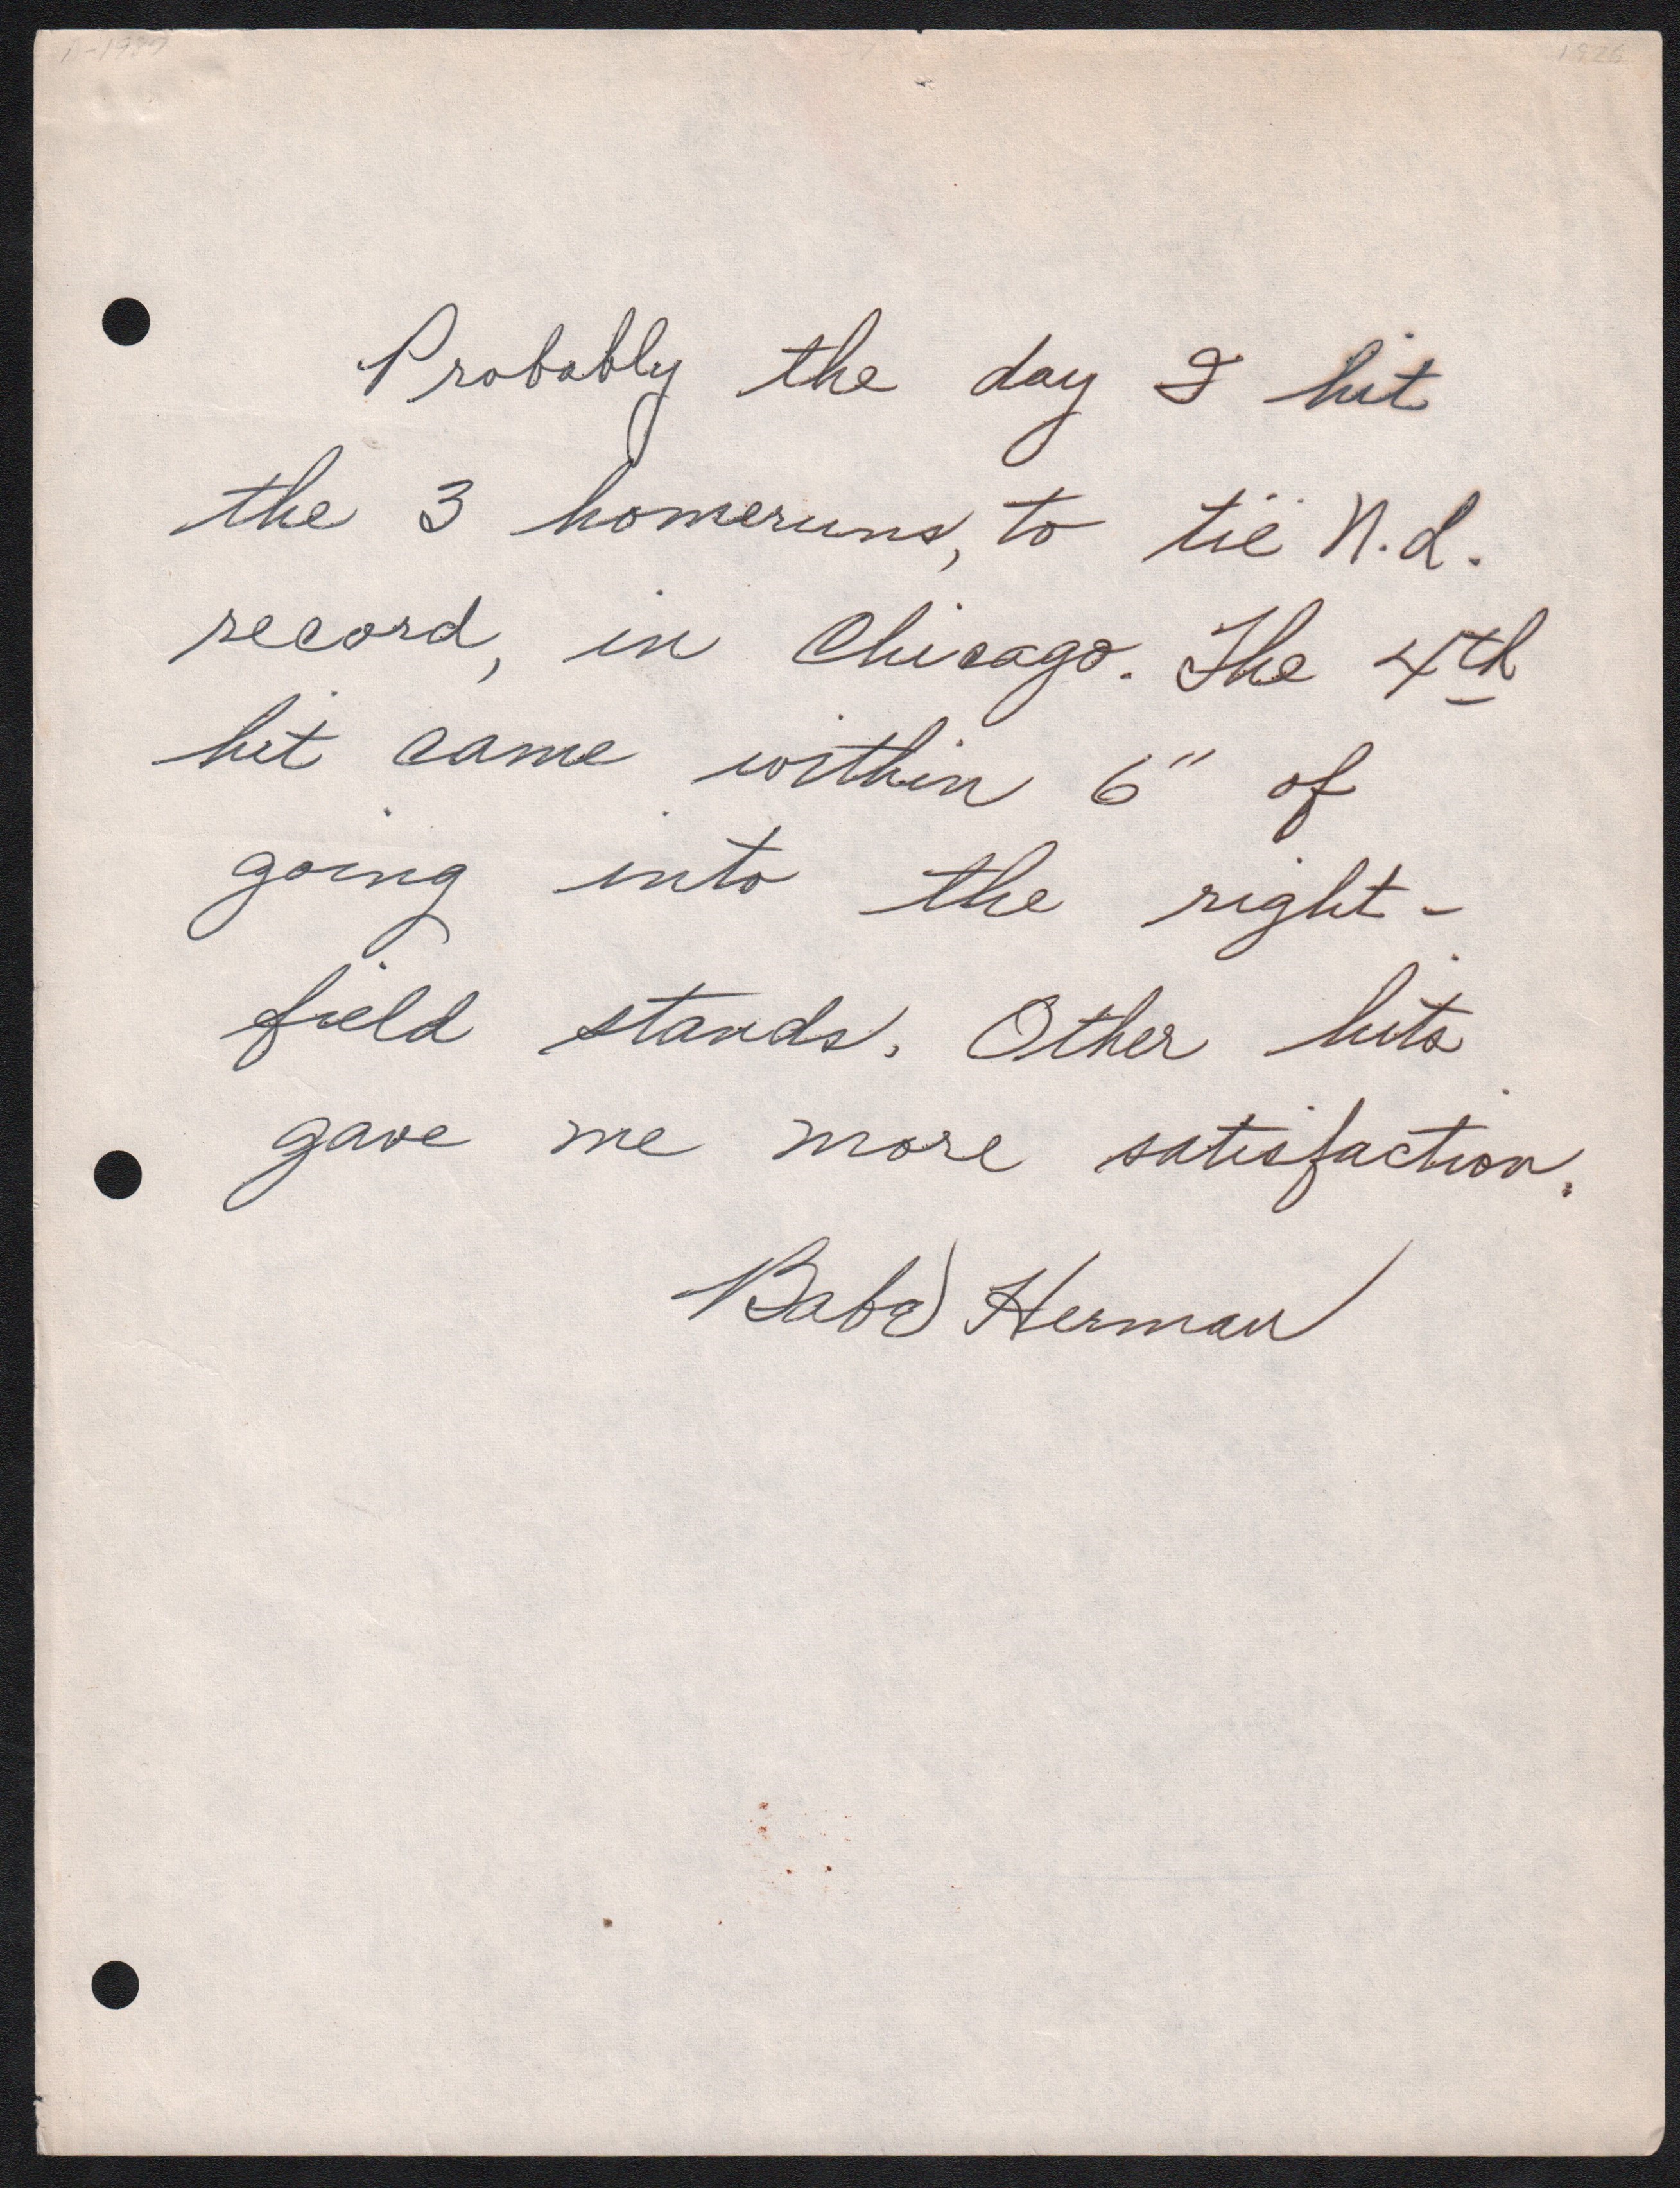 Babe Herman Signed Greatest Moment Letter 3-HRs to Tie N.L. Record